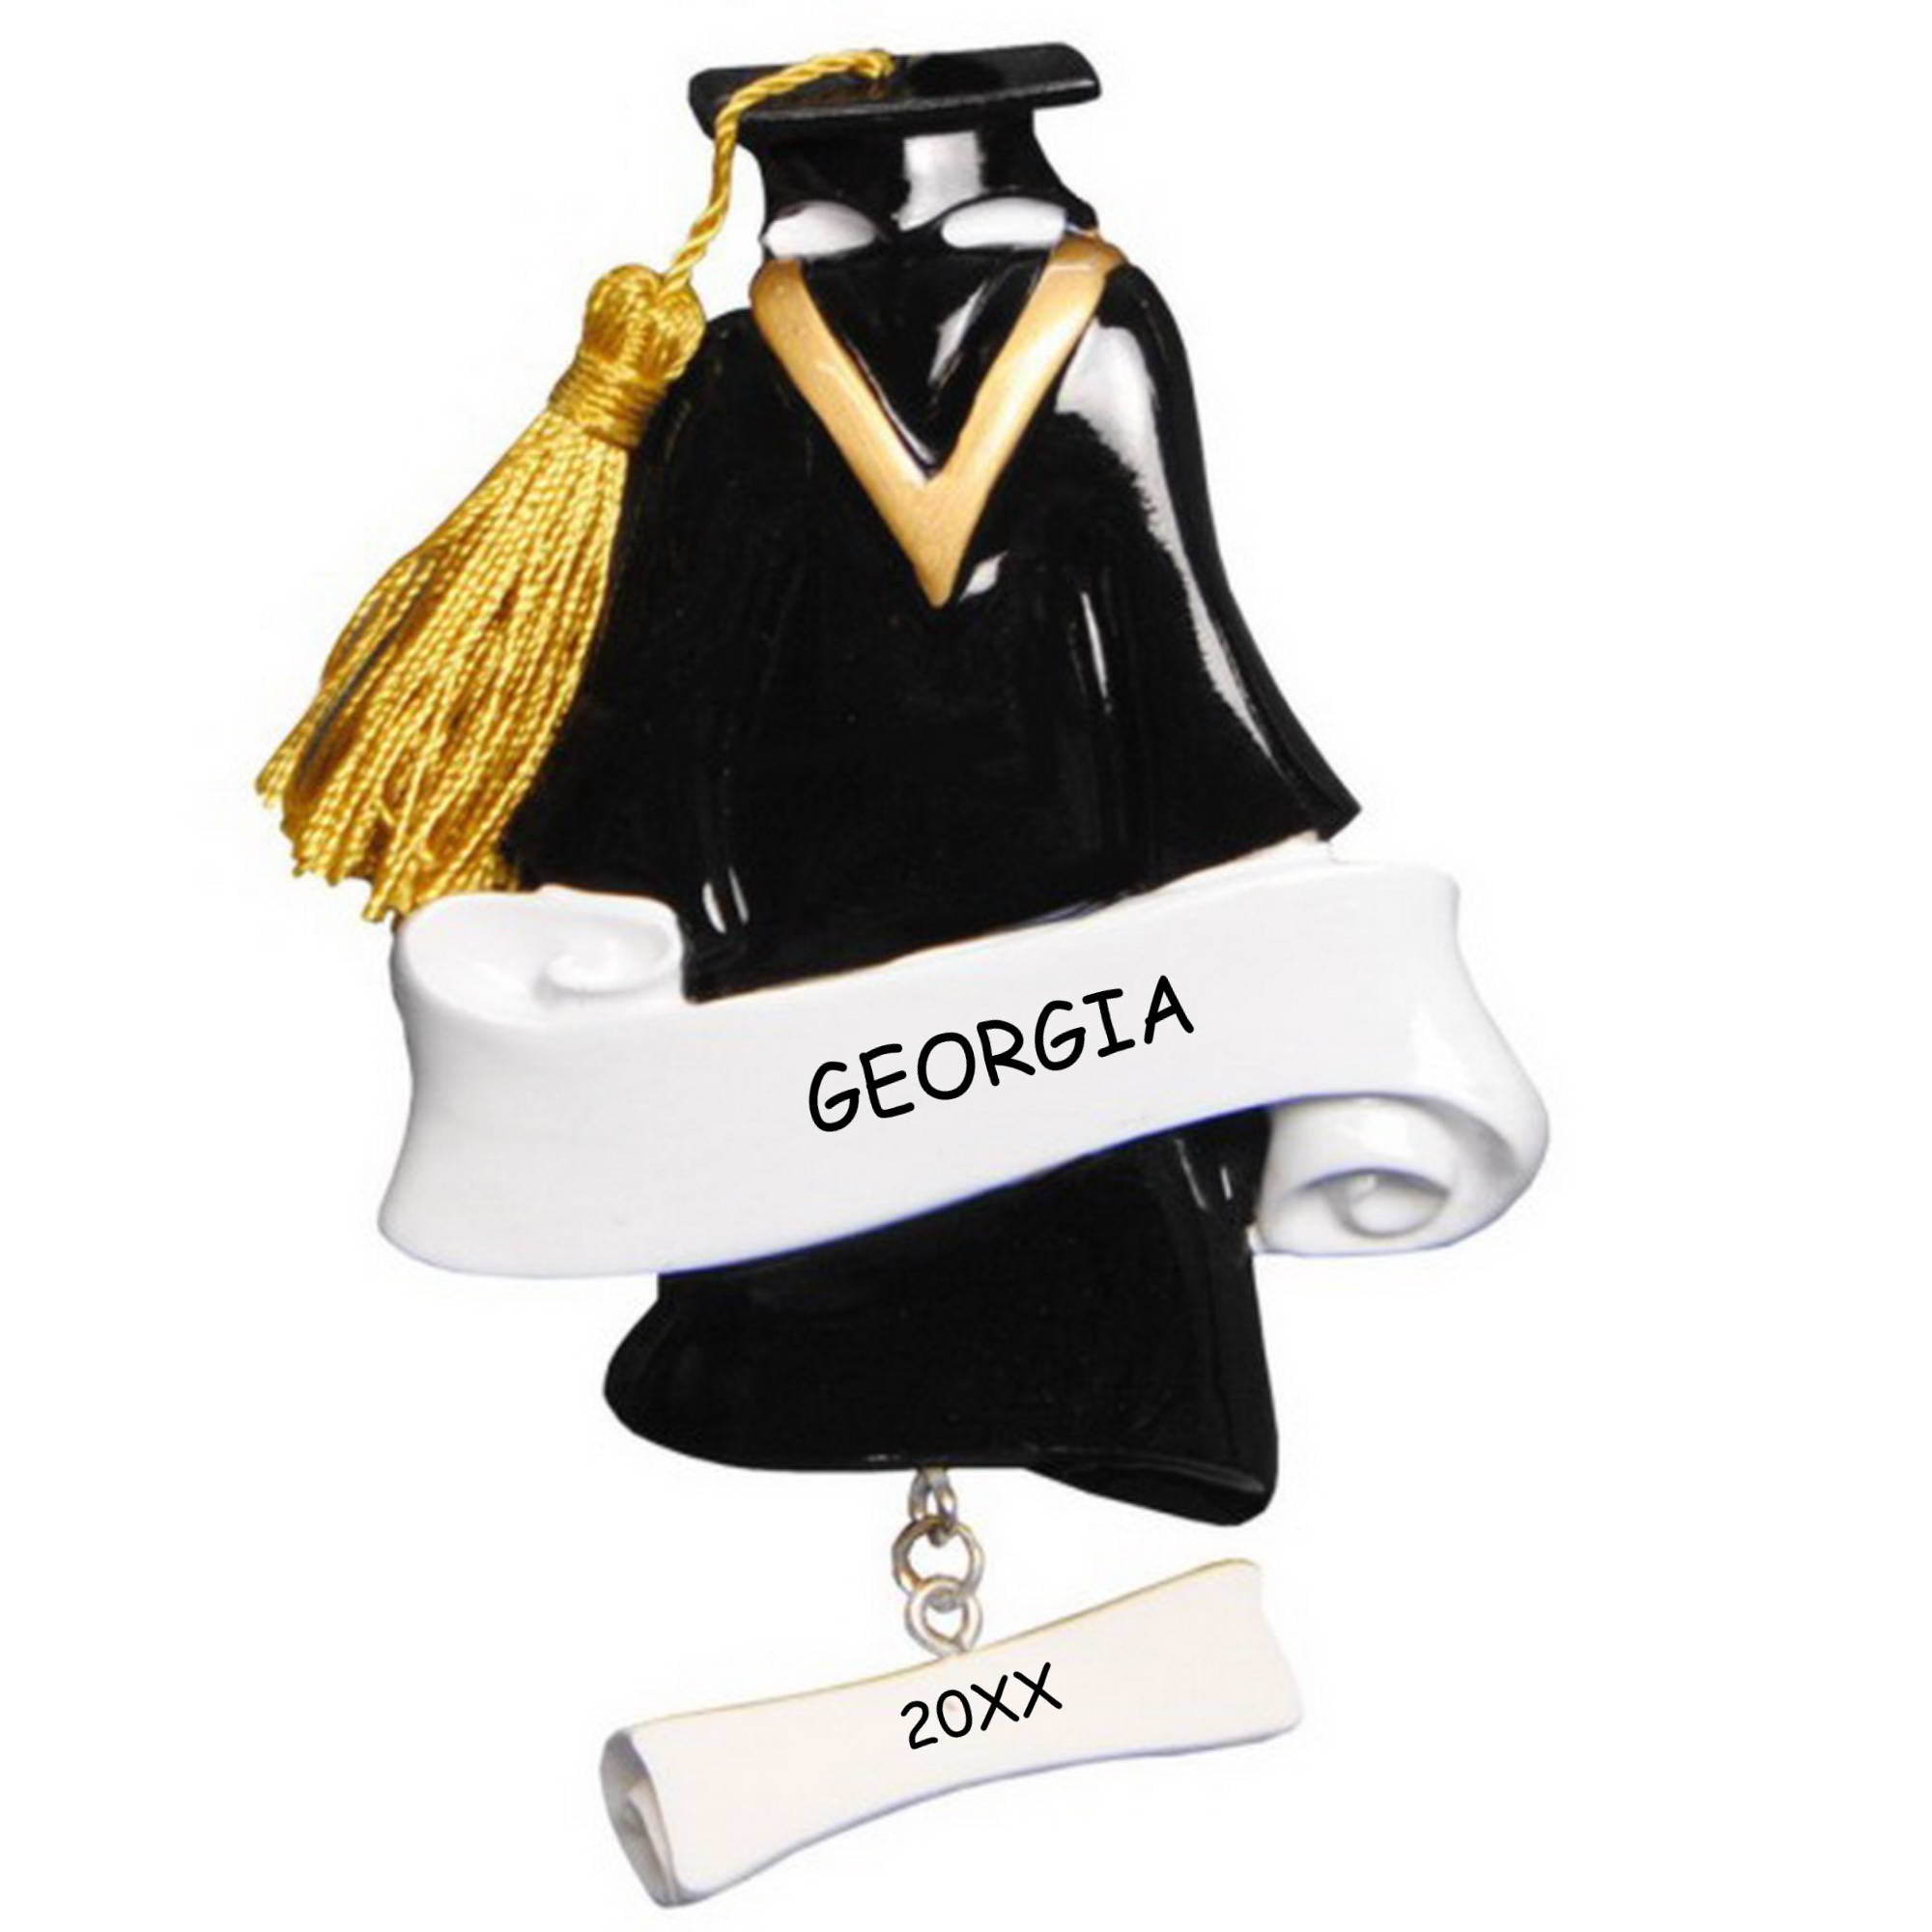 Personalized Graduation Gown Christmas Ornament